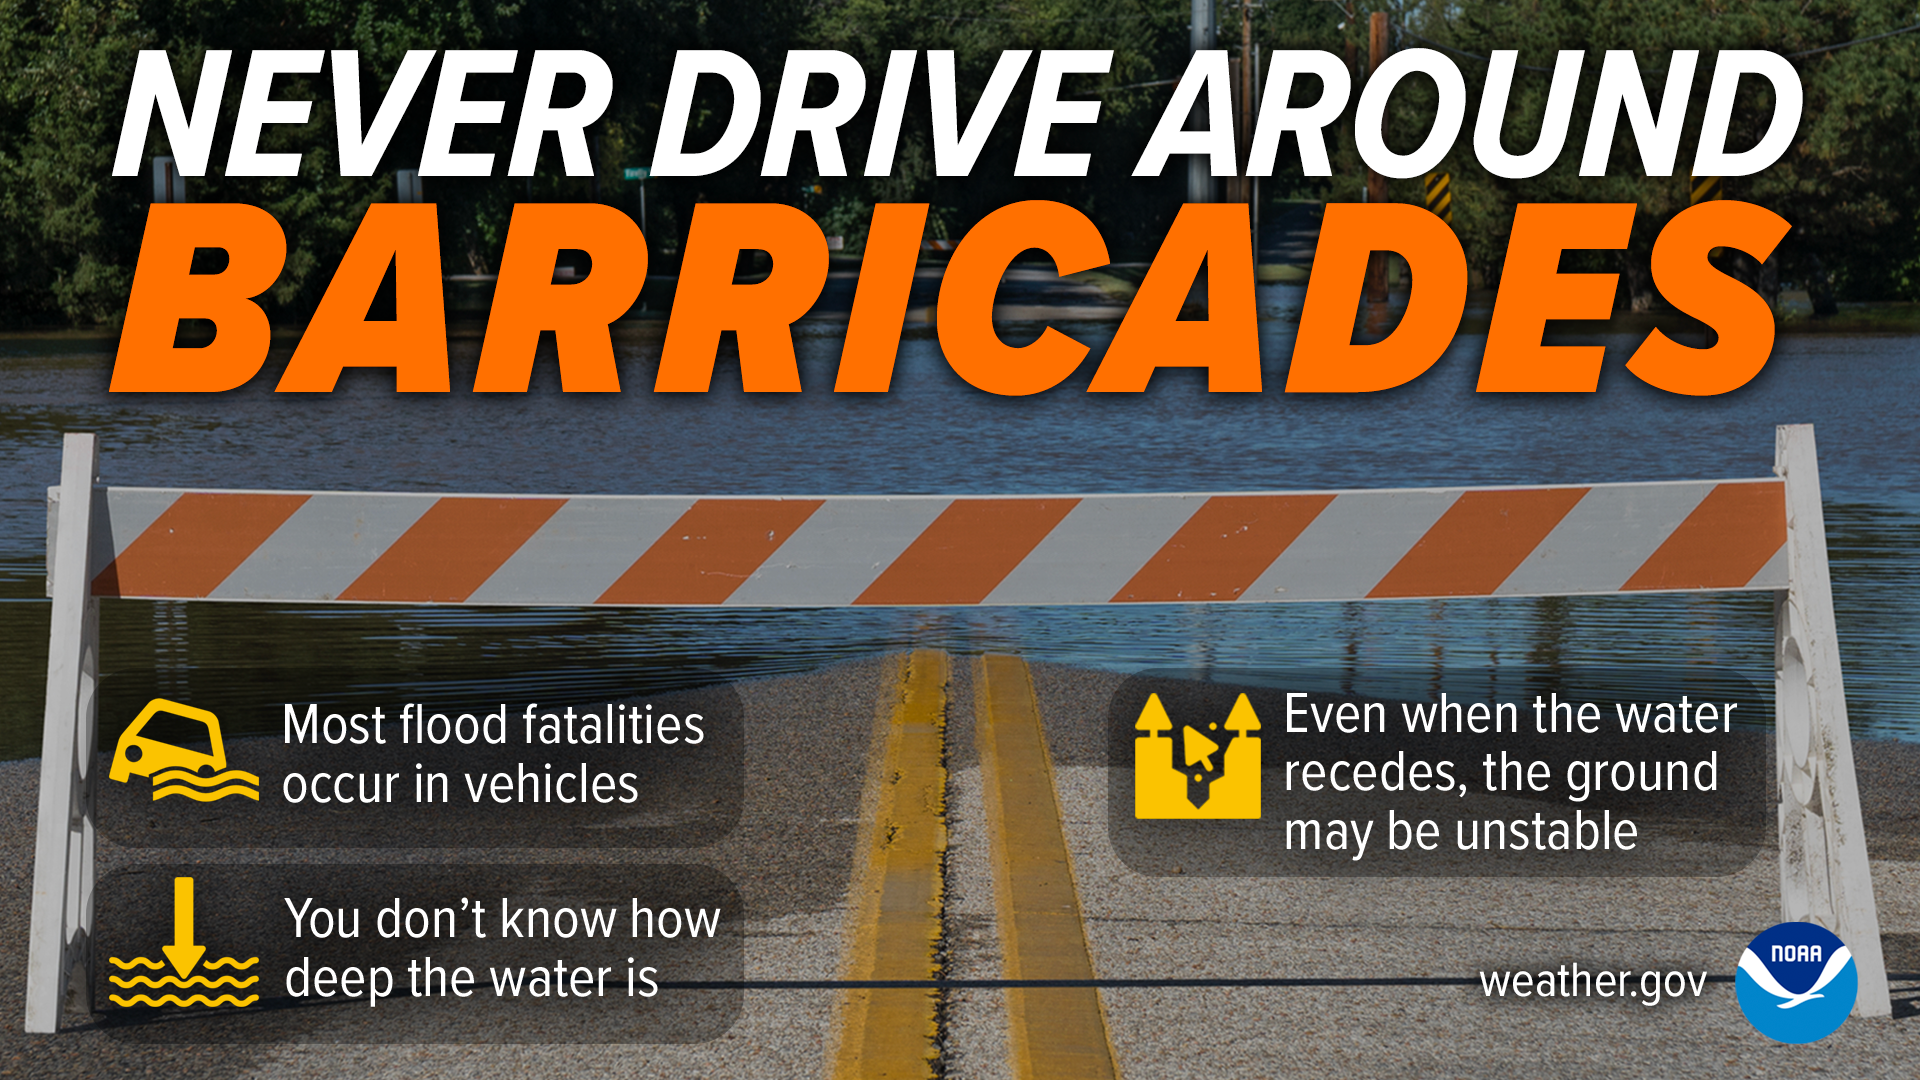 Never drive around barricades. Most flood fatalities occur in vehicles. You don't know how deep the water is. Even when the water recedes, the ground may be unstable.